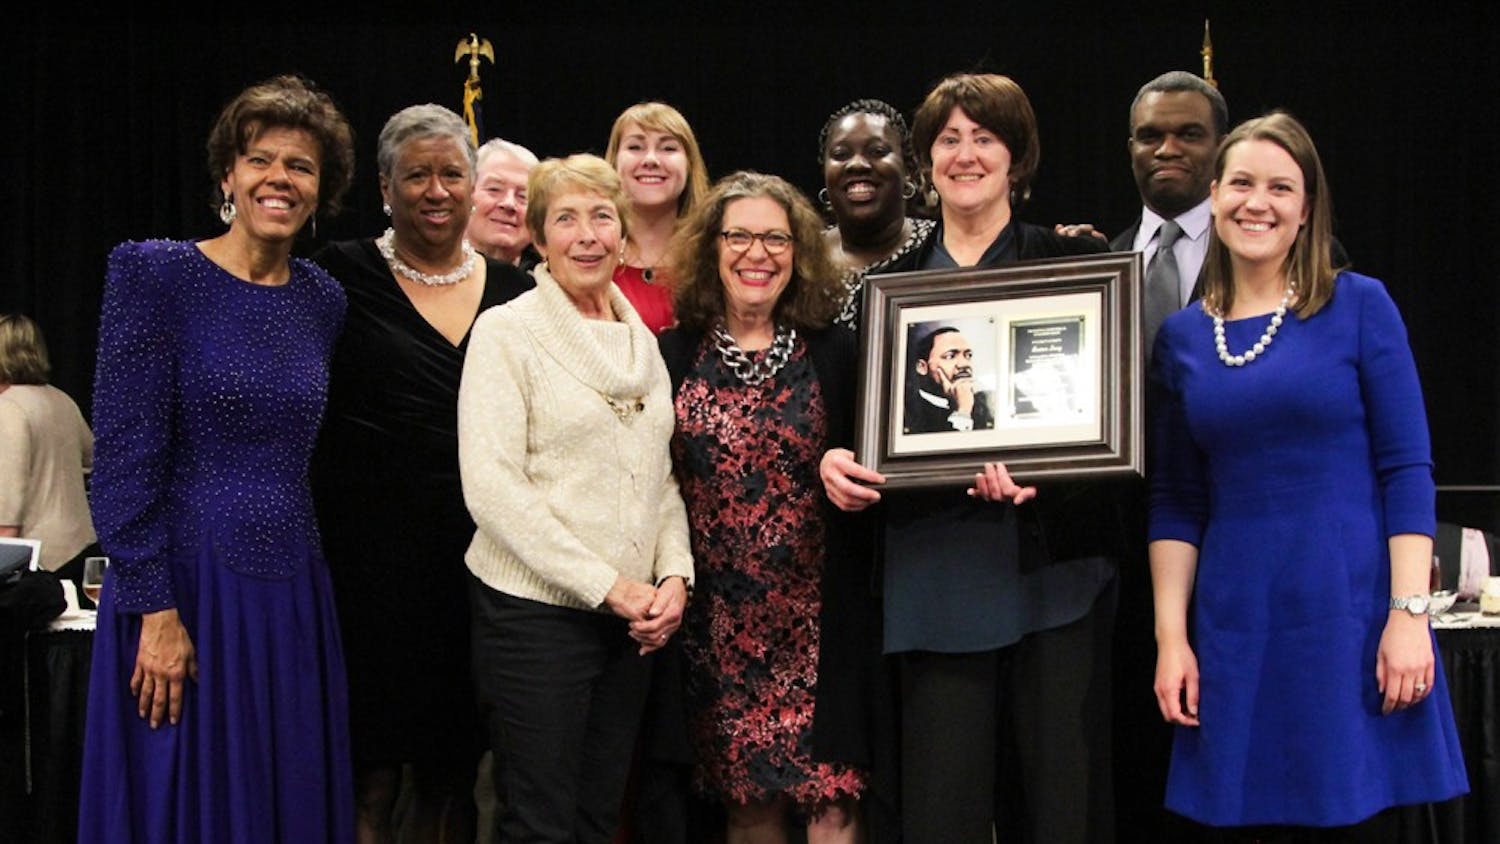 Susan Levy was named Citizen of the Year. Photo courtesy of Savanna Melton.&nbsp;